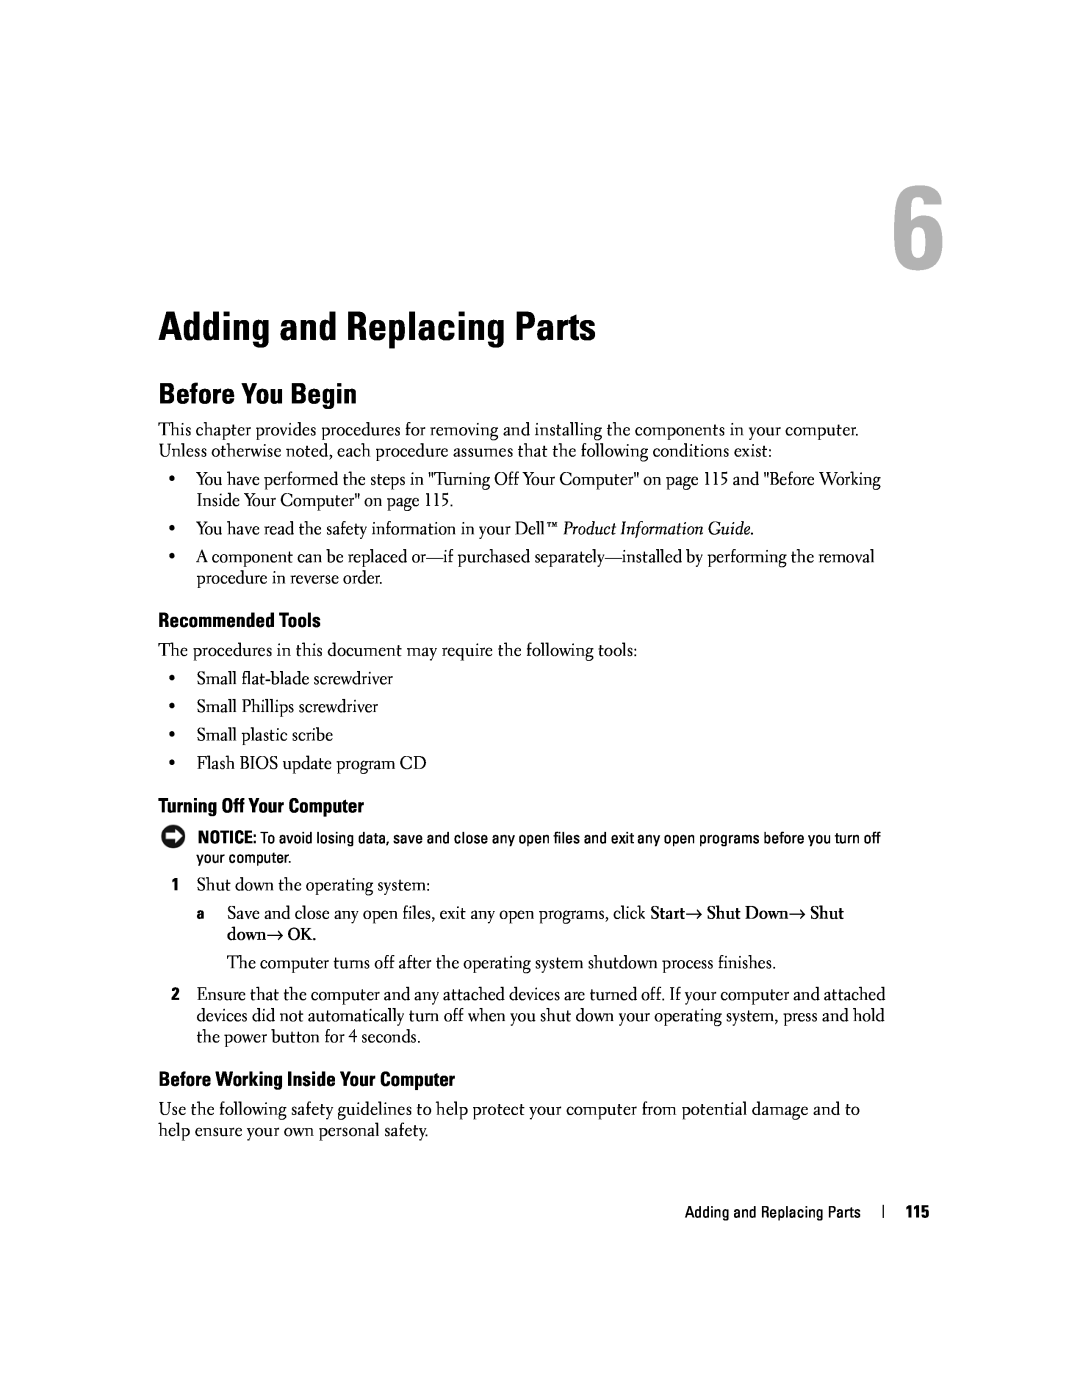 Dell PP24L manual Adding and Replacing Parts, Before You Begin, Recommended Tools, Turning Off Your Computer 